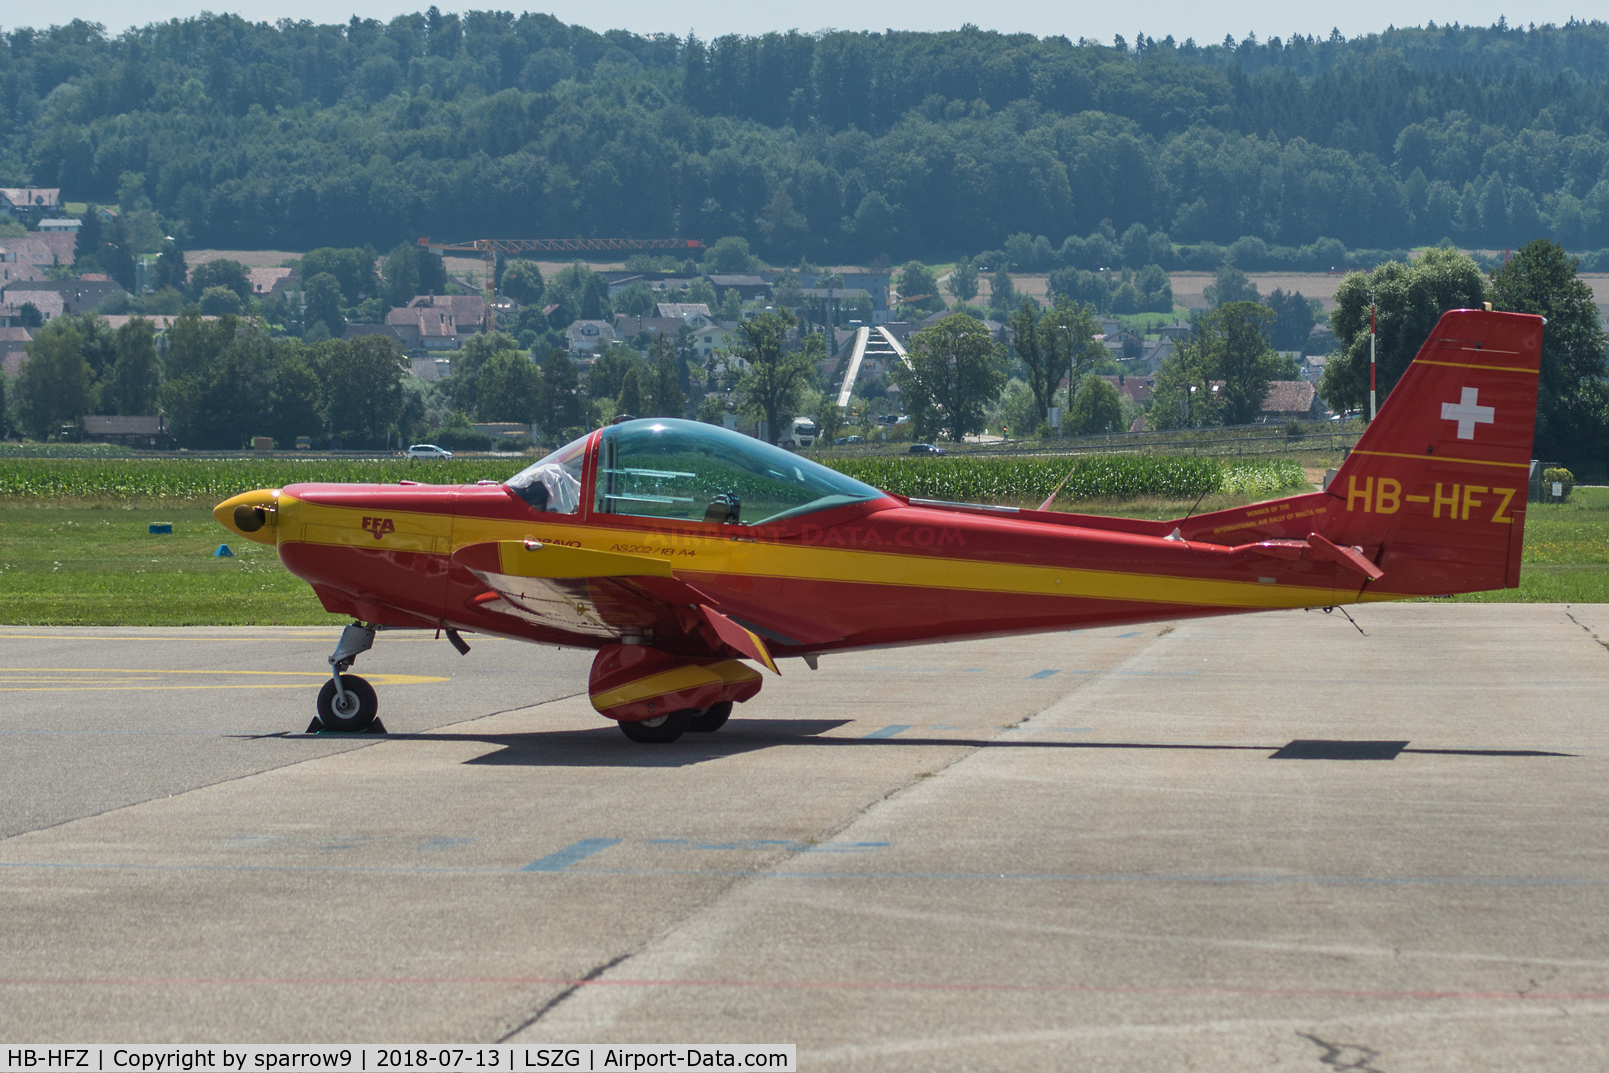 HB-HFZ, 1991 FFA AS-202/18A-4 Bravo C/N 237, At Grenchen airport.